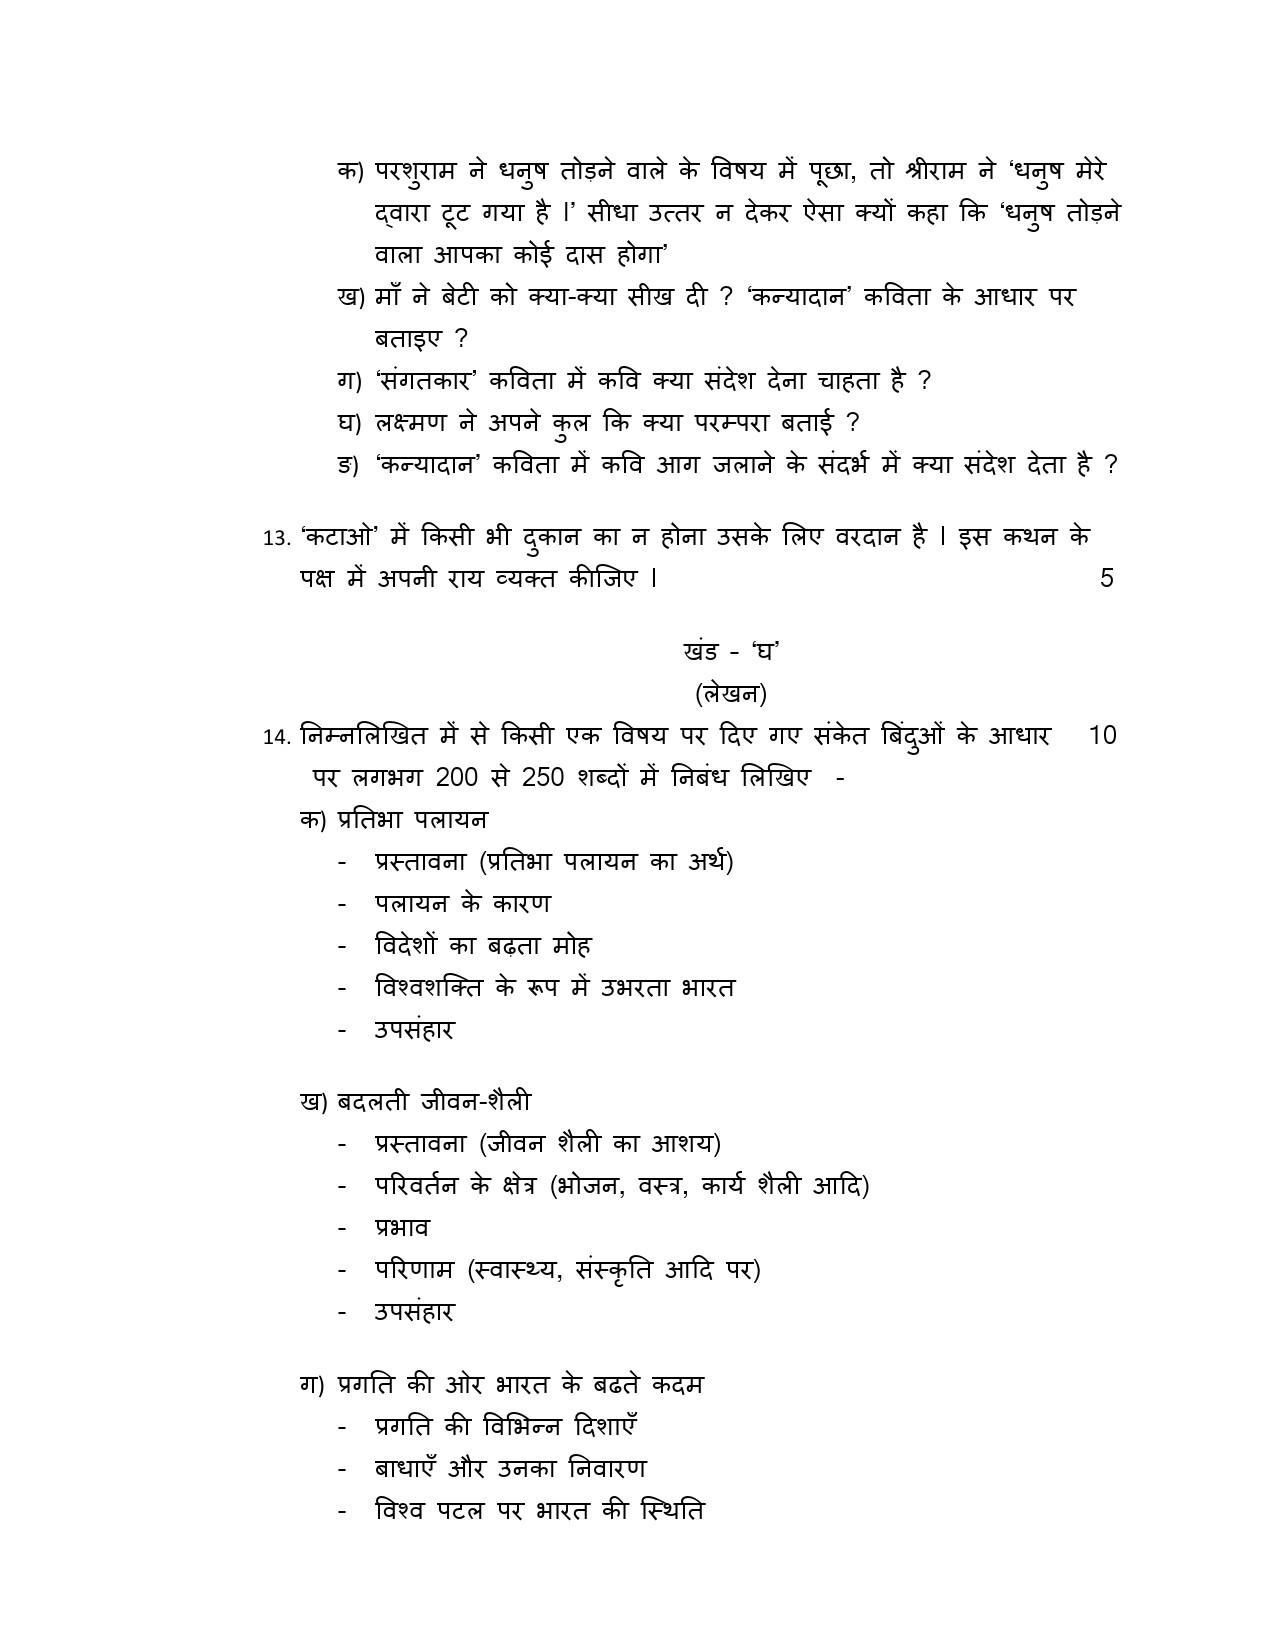 Hindi A CBSE Class X Sample Question Paper 2015 16 - Image 9